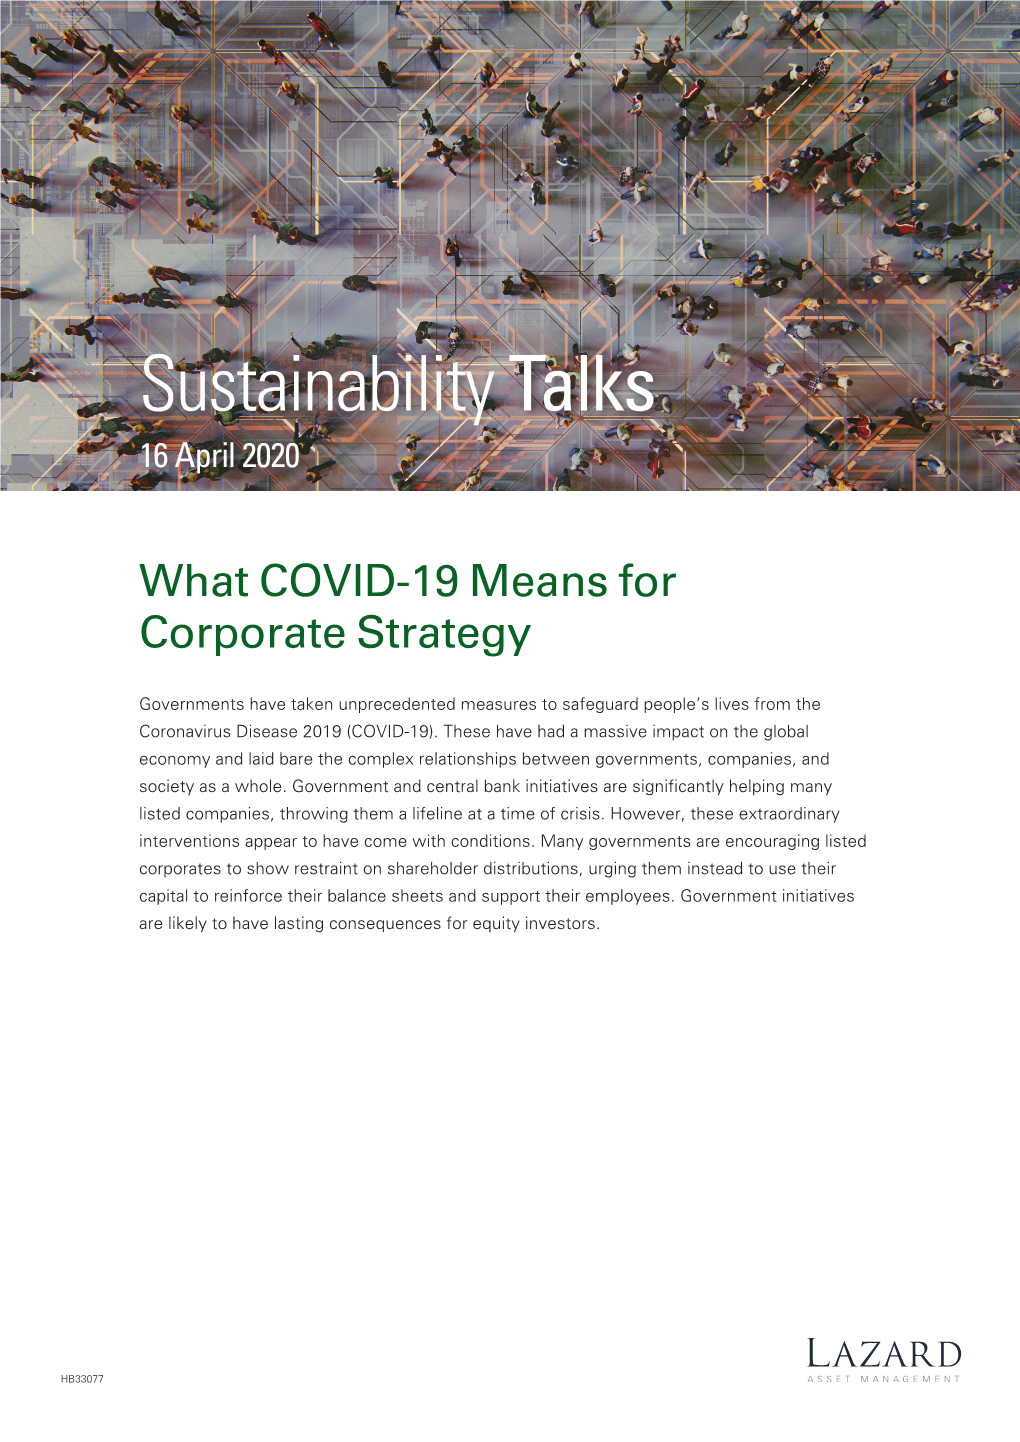 Sustainability Talks: What COVID-19 Means for Corporate Strategy